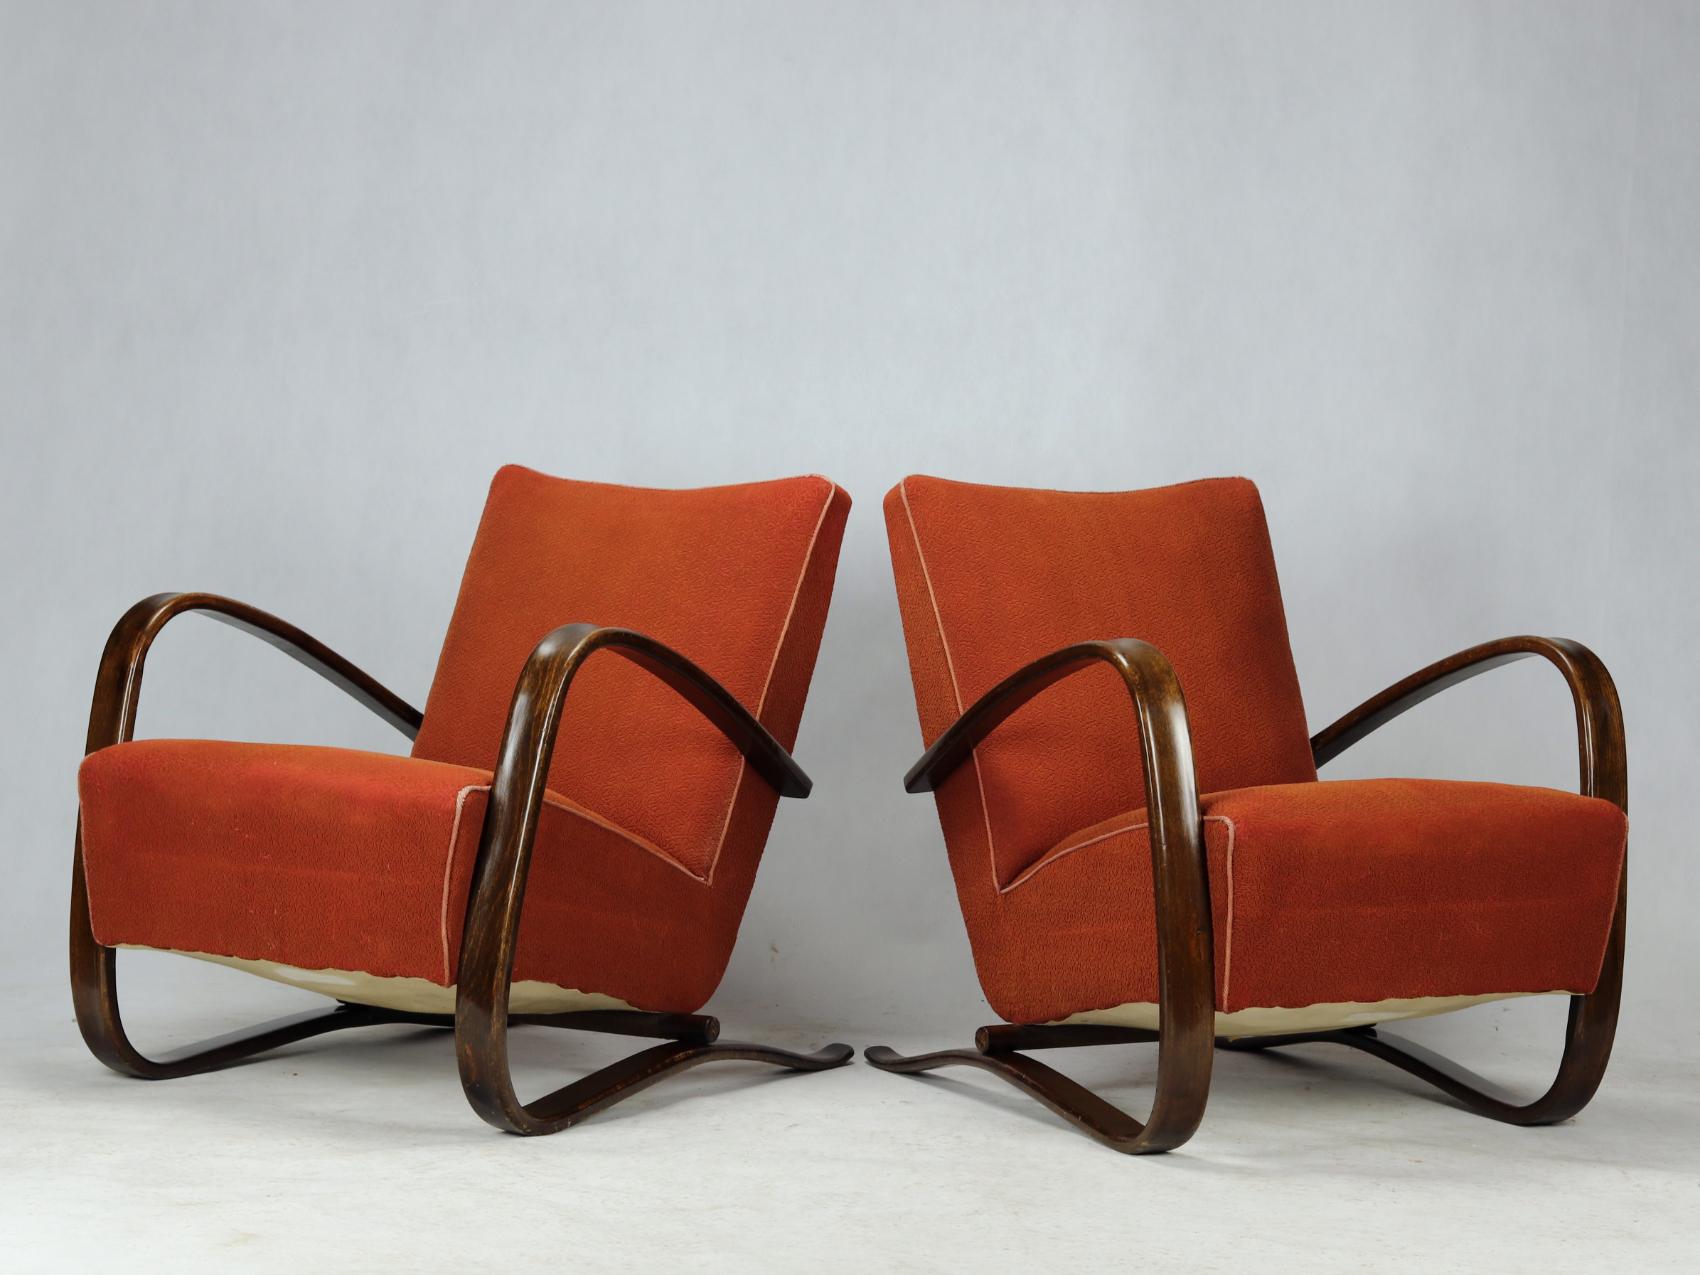 Pair of H 269 Lounge Chairs by Jindřich Halabala for Up Závody Brno, 1930s 1